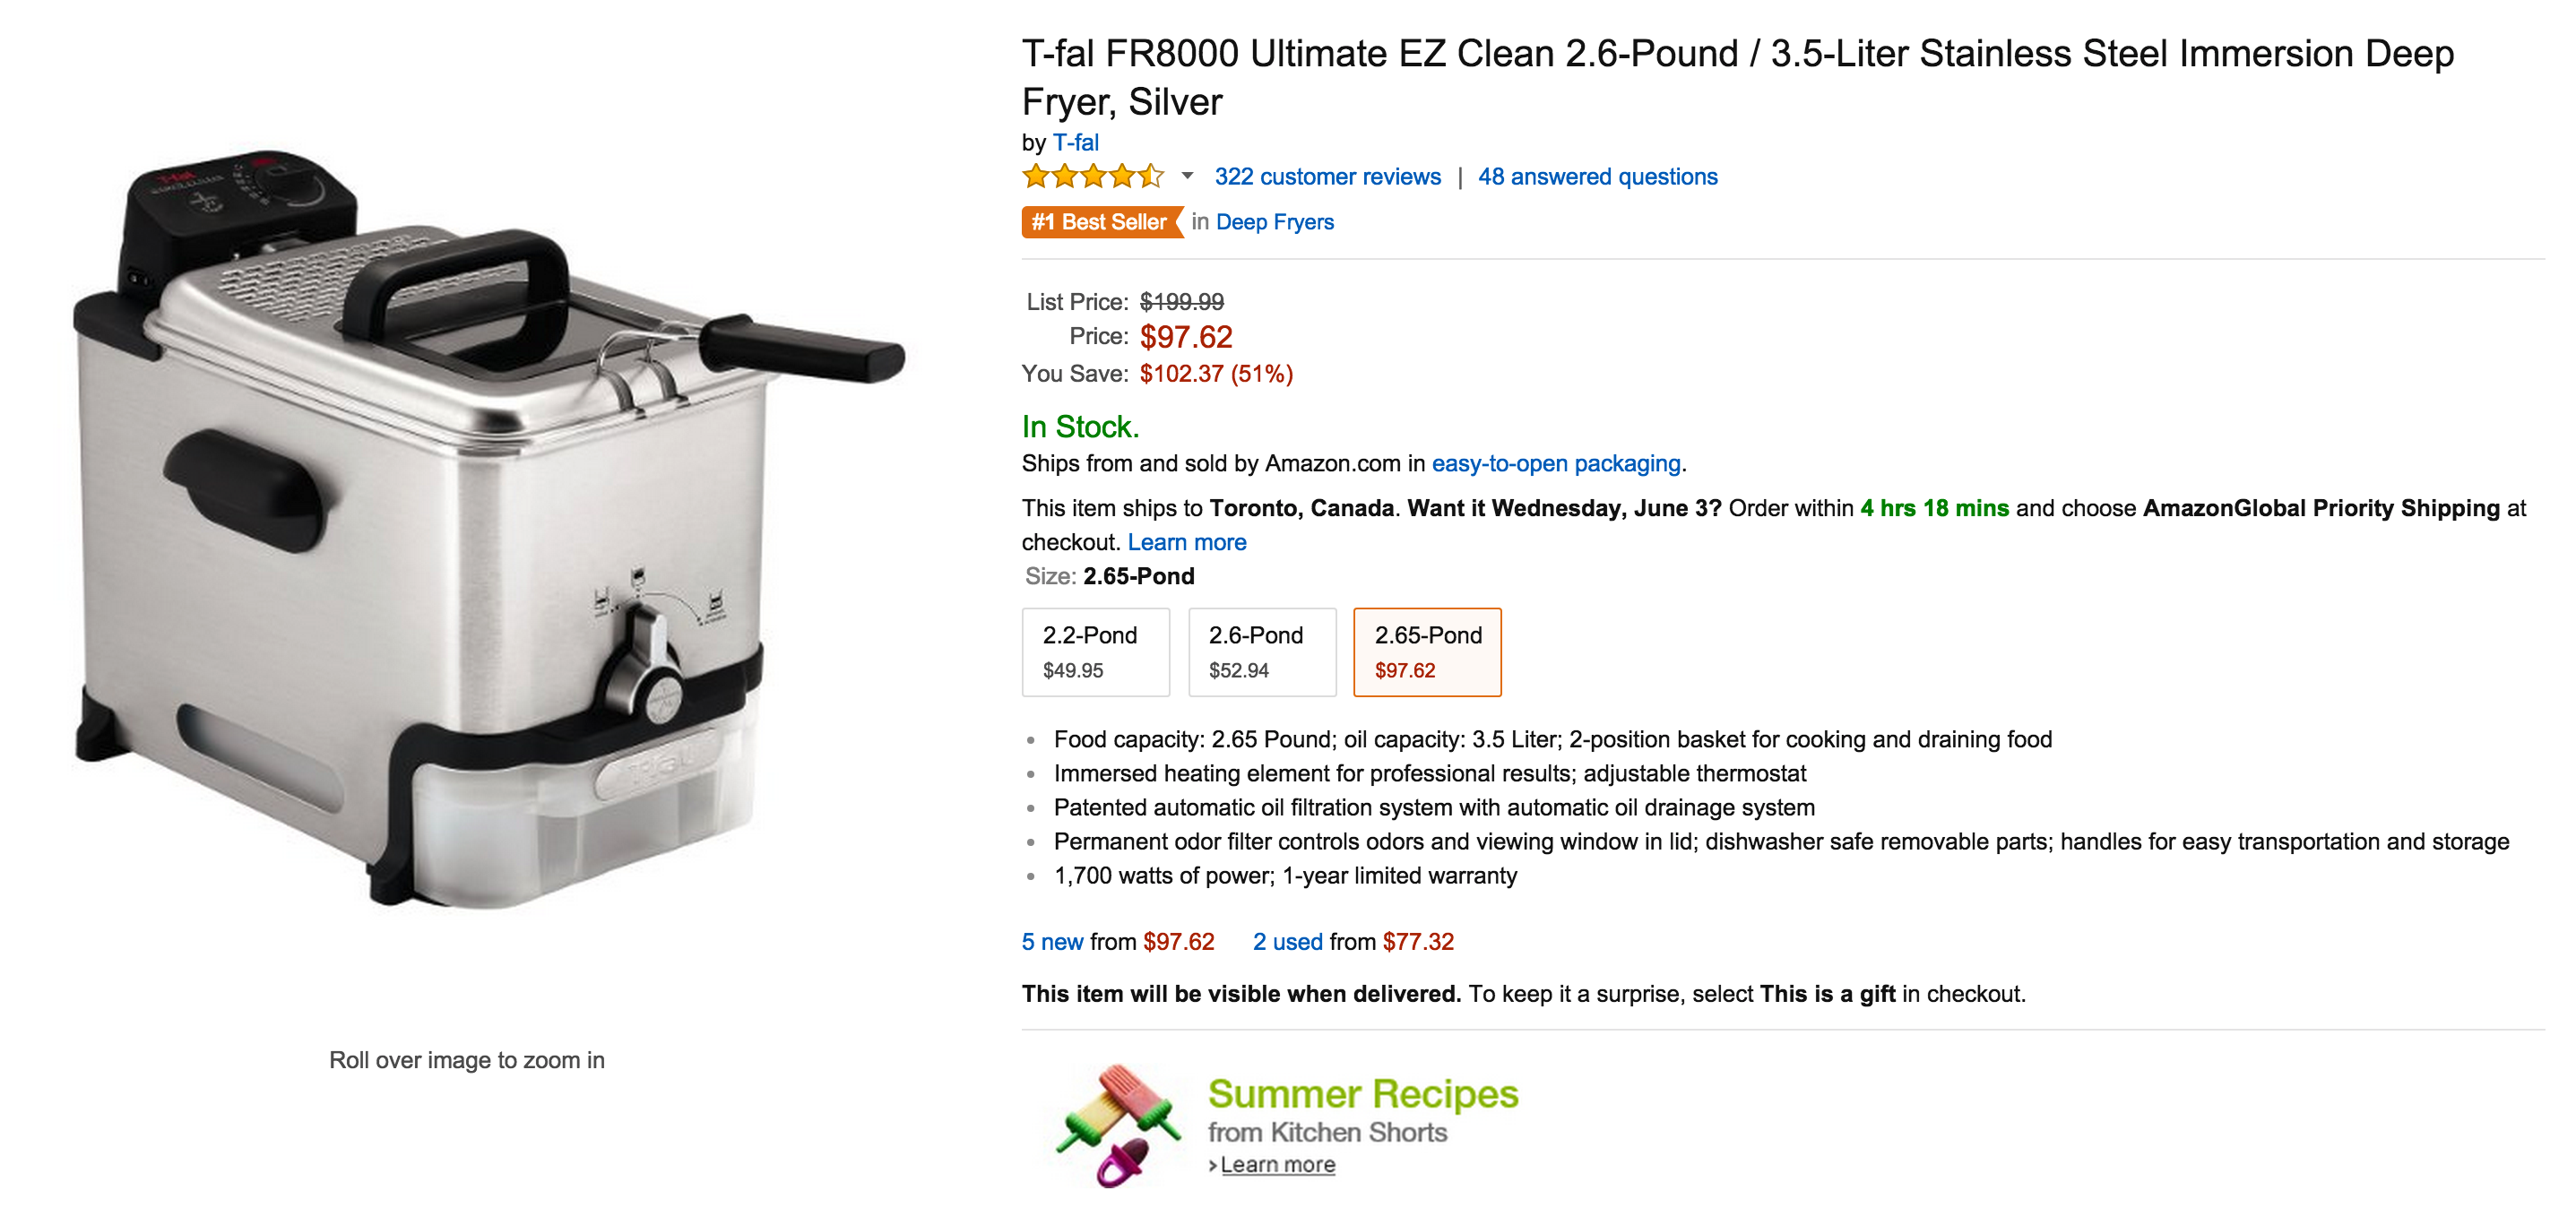 https://9to5toys.com/wp-content/uploads/sites/5/2015/06/t-fal-ultimate-ez-clean-2-6-pound-3-5-liter-stainless-steel-immersion-deep-fryer-fr8000-sale-02.png